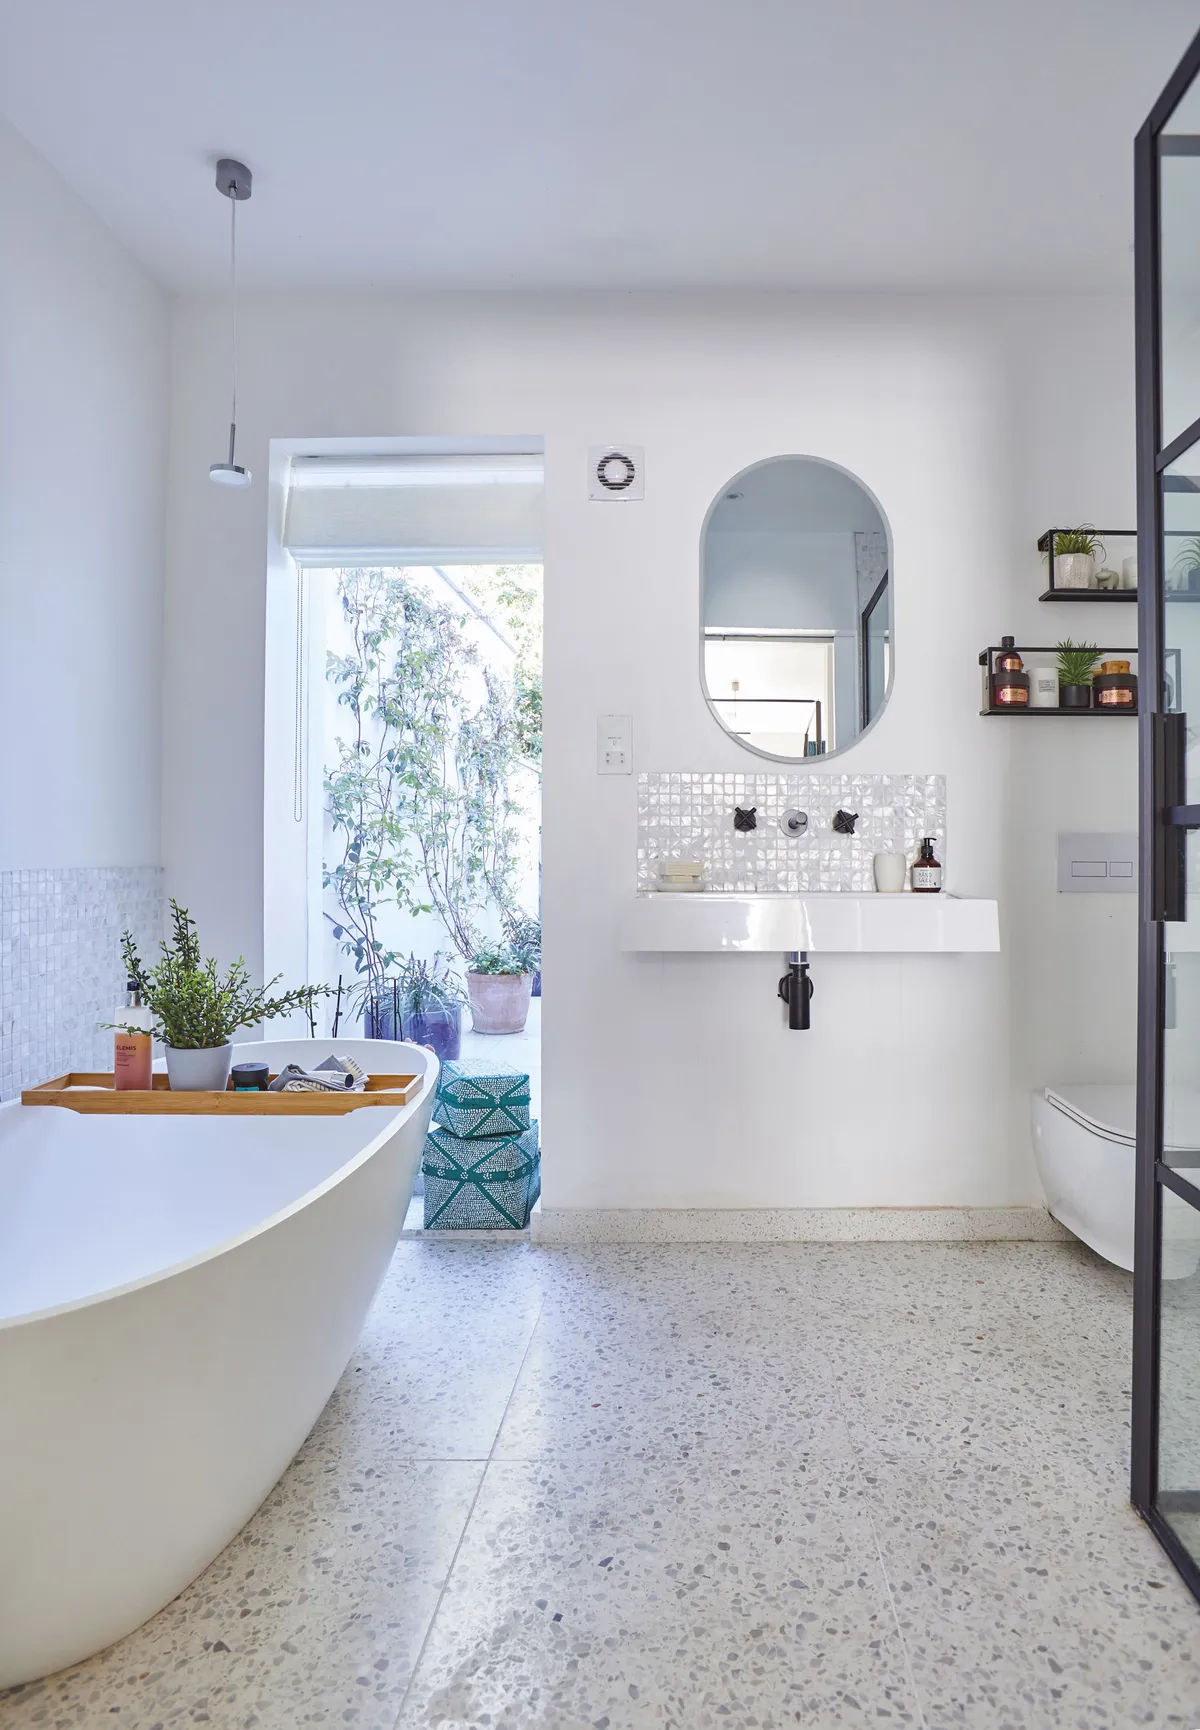 In the window of the en suite, Shrez has added Balinese storage baskets from La Redoute to add a pop of colour. The industrial-style taps are from Meir Black